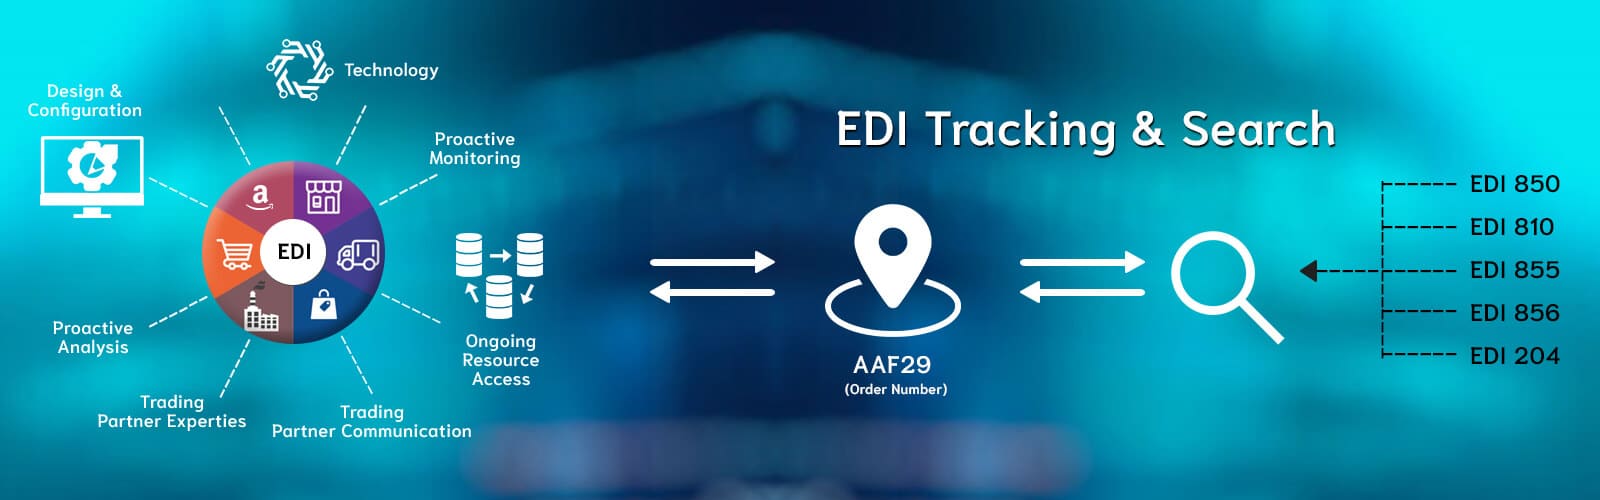 EDI-Tracking-And-Search